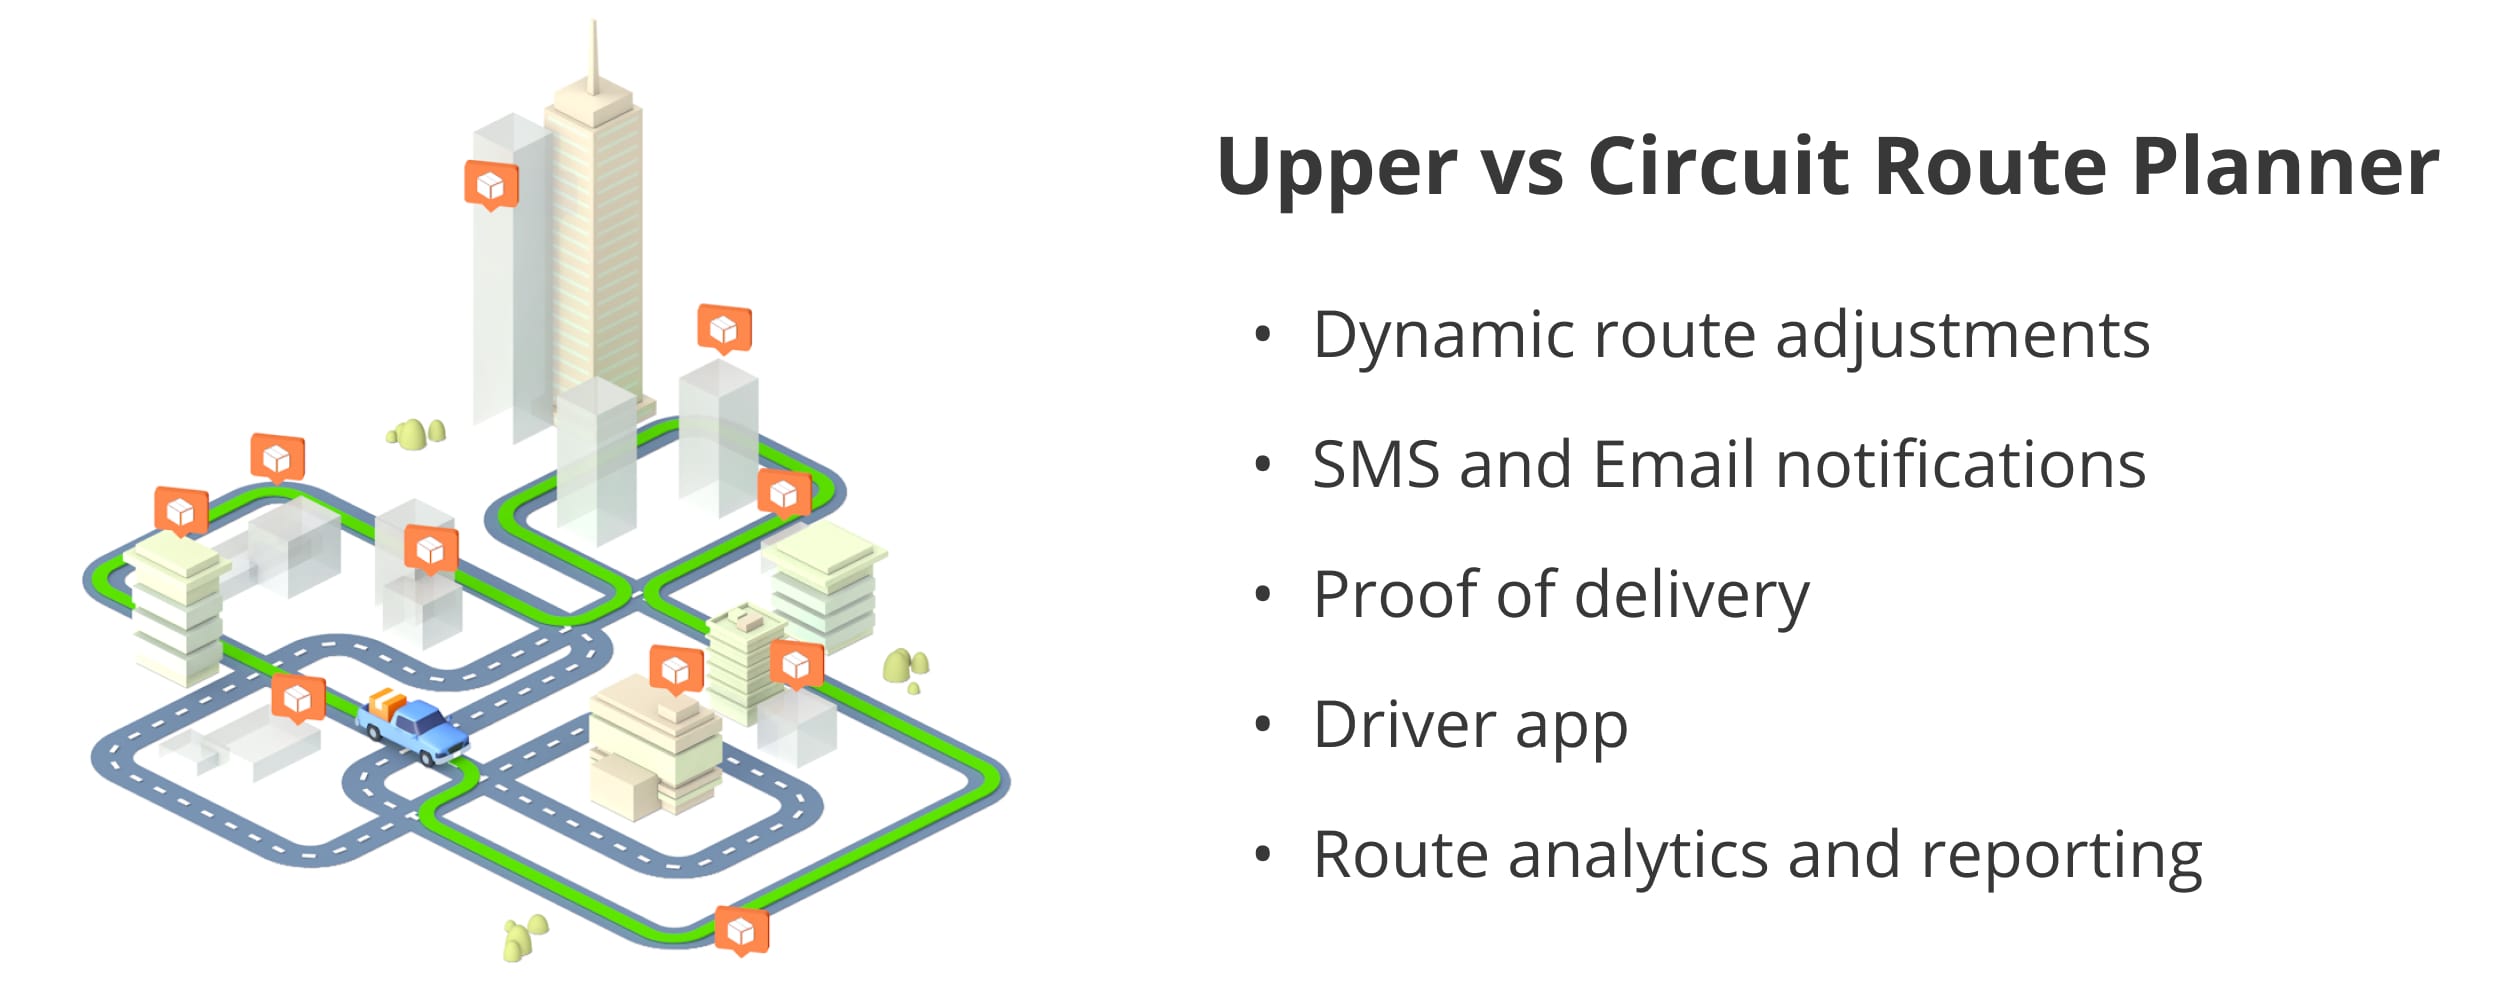 Upper Route Planner vs Circuit Route Planner review and feature comparison.